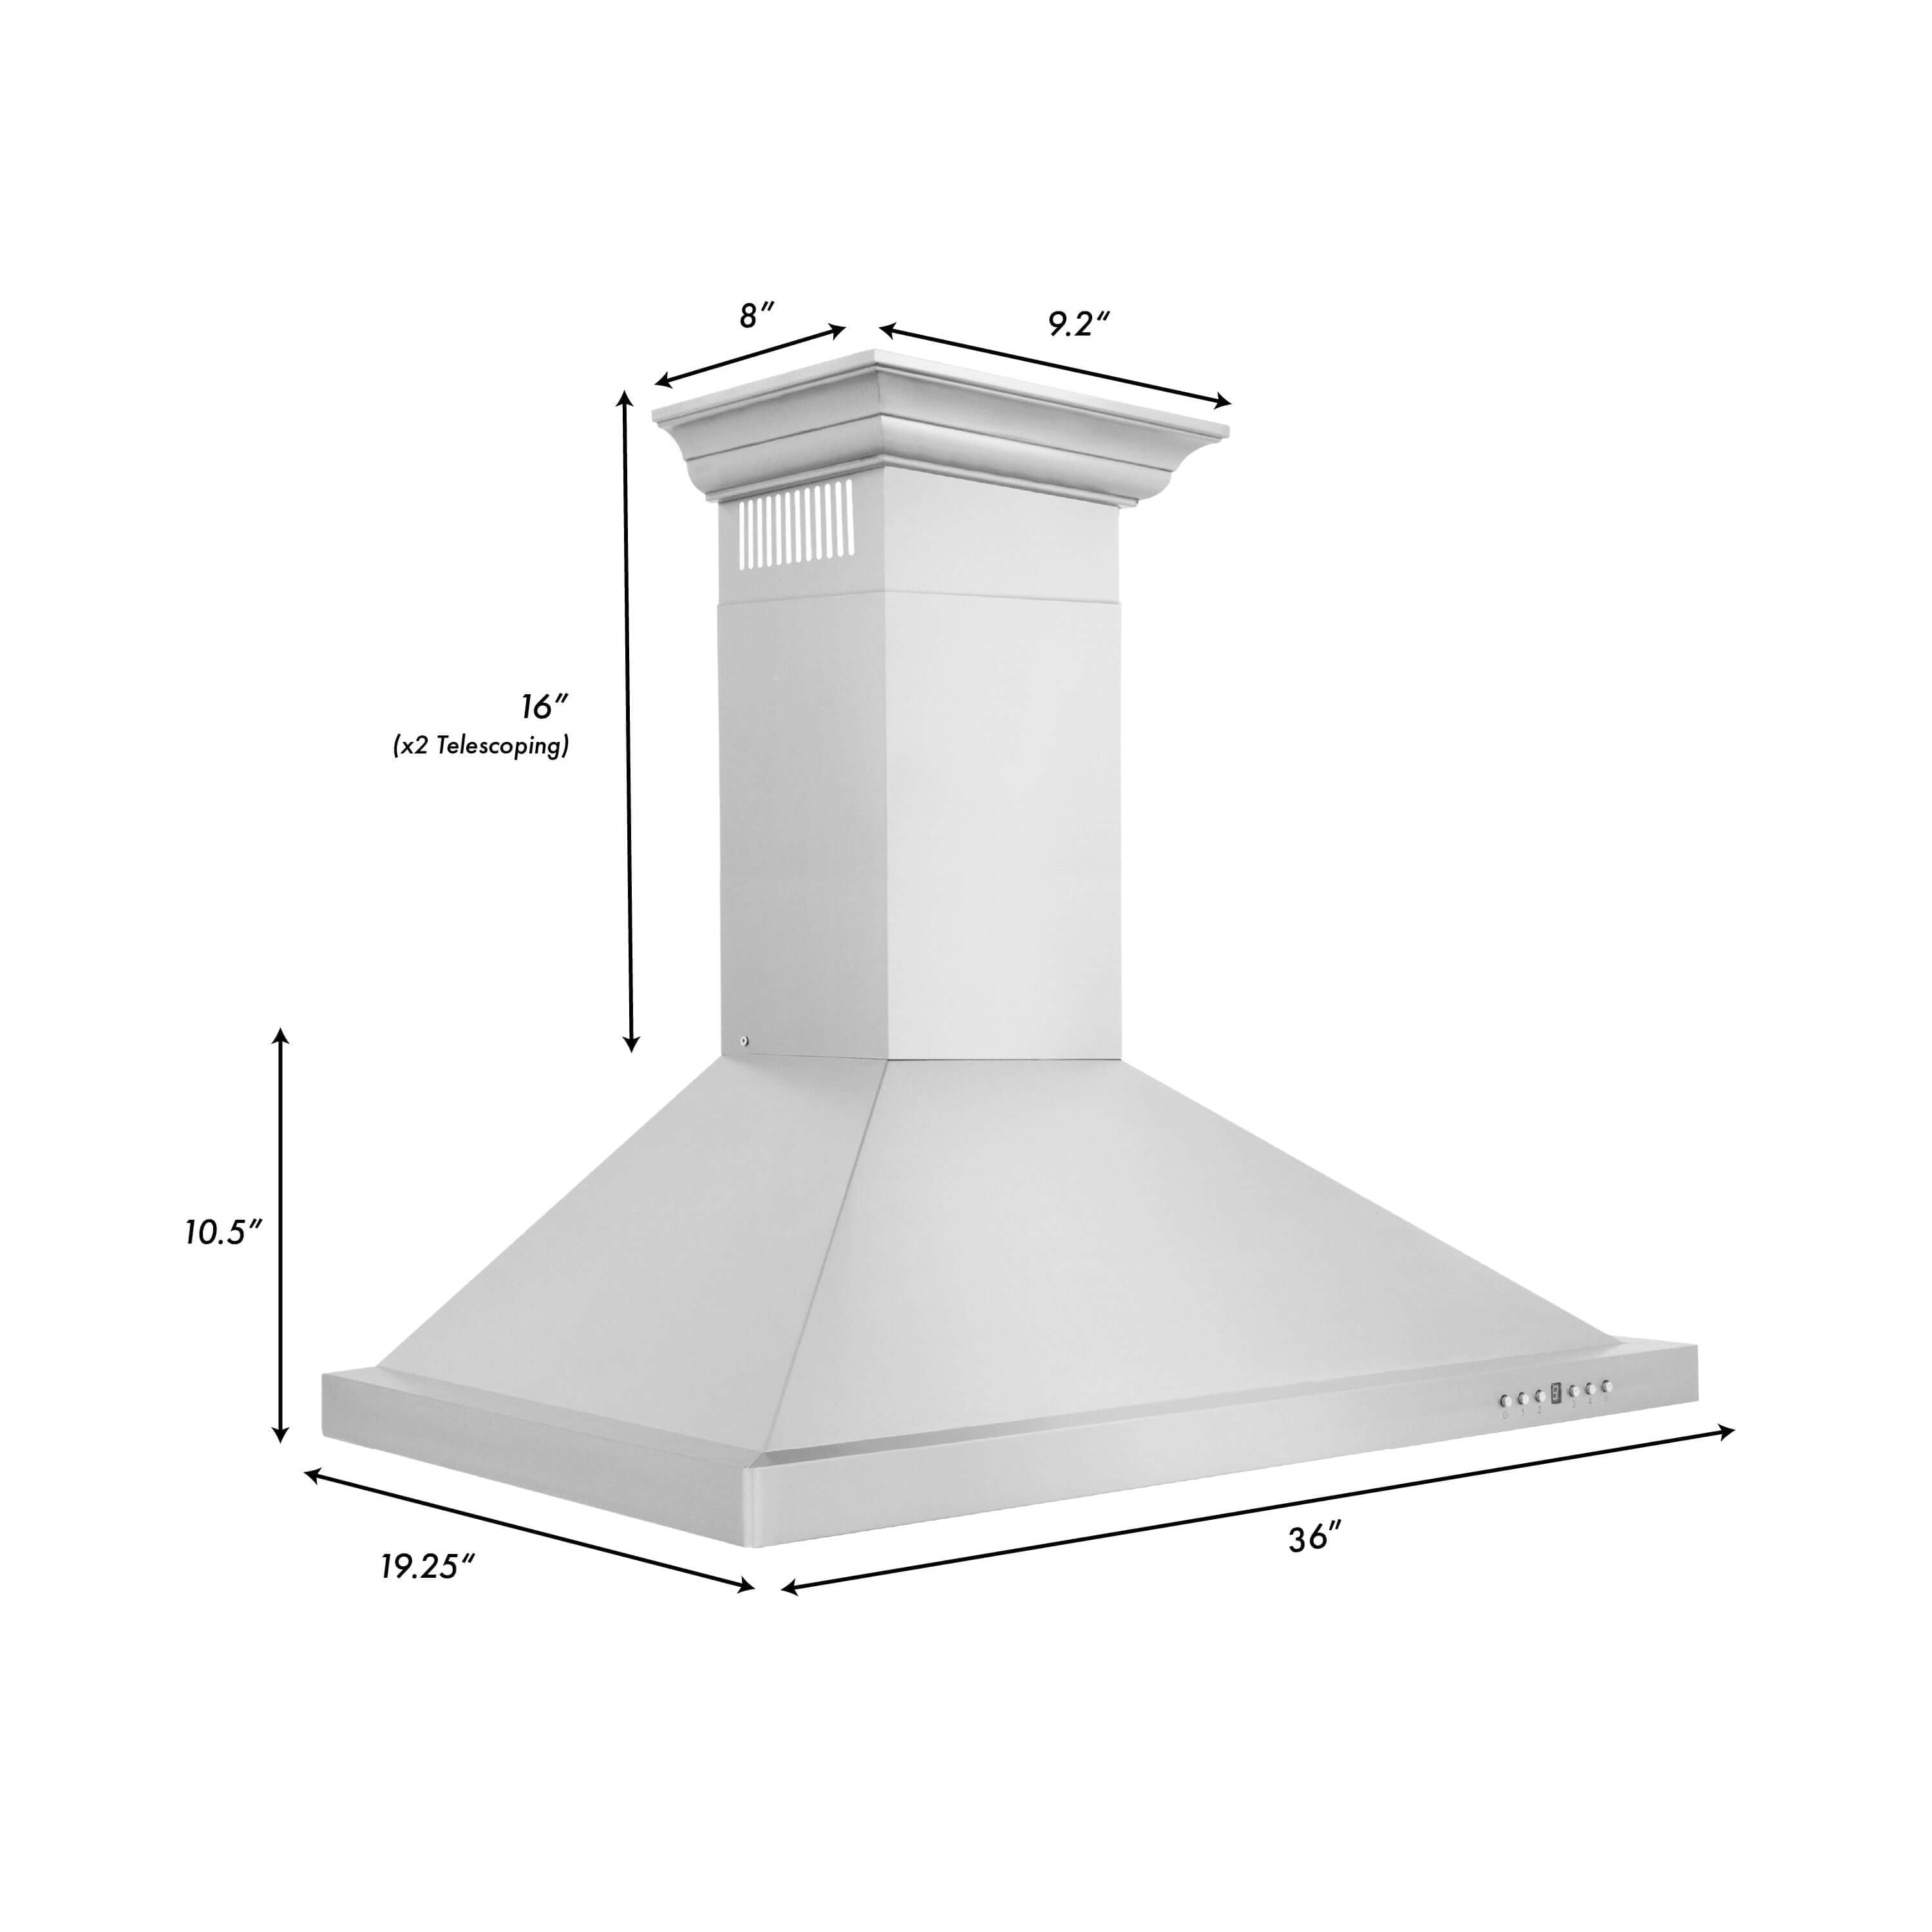 ZLINE 42" Convertible Vent Wall Mount Range Hood in Stainless Steel with Crown Molding (KBCRN-42)